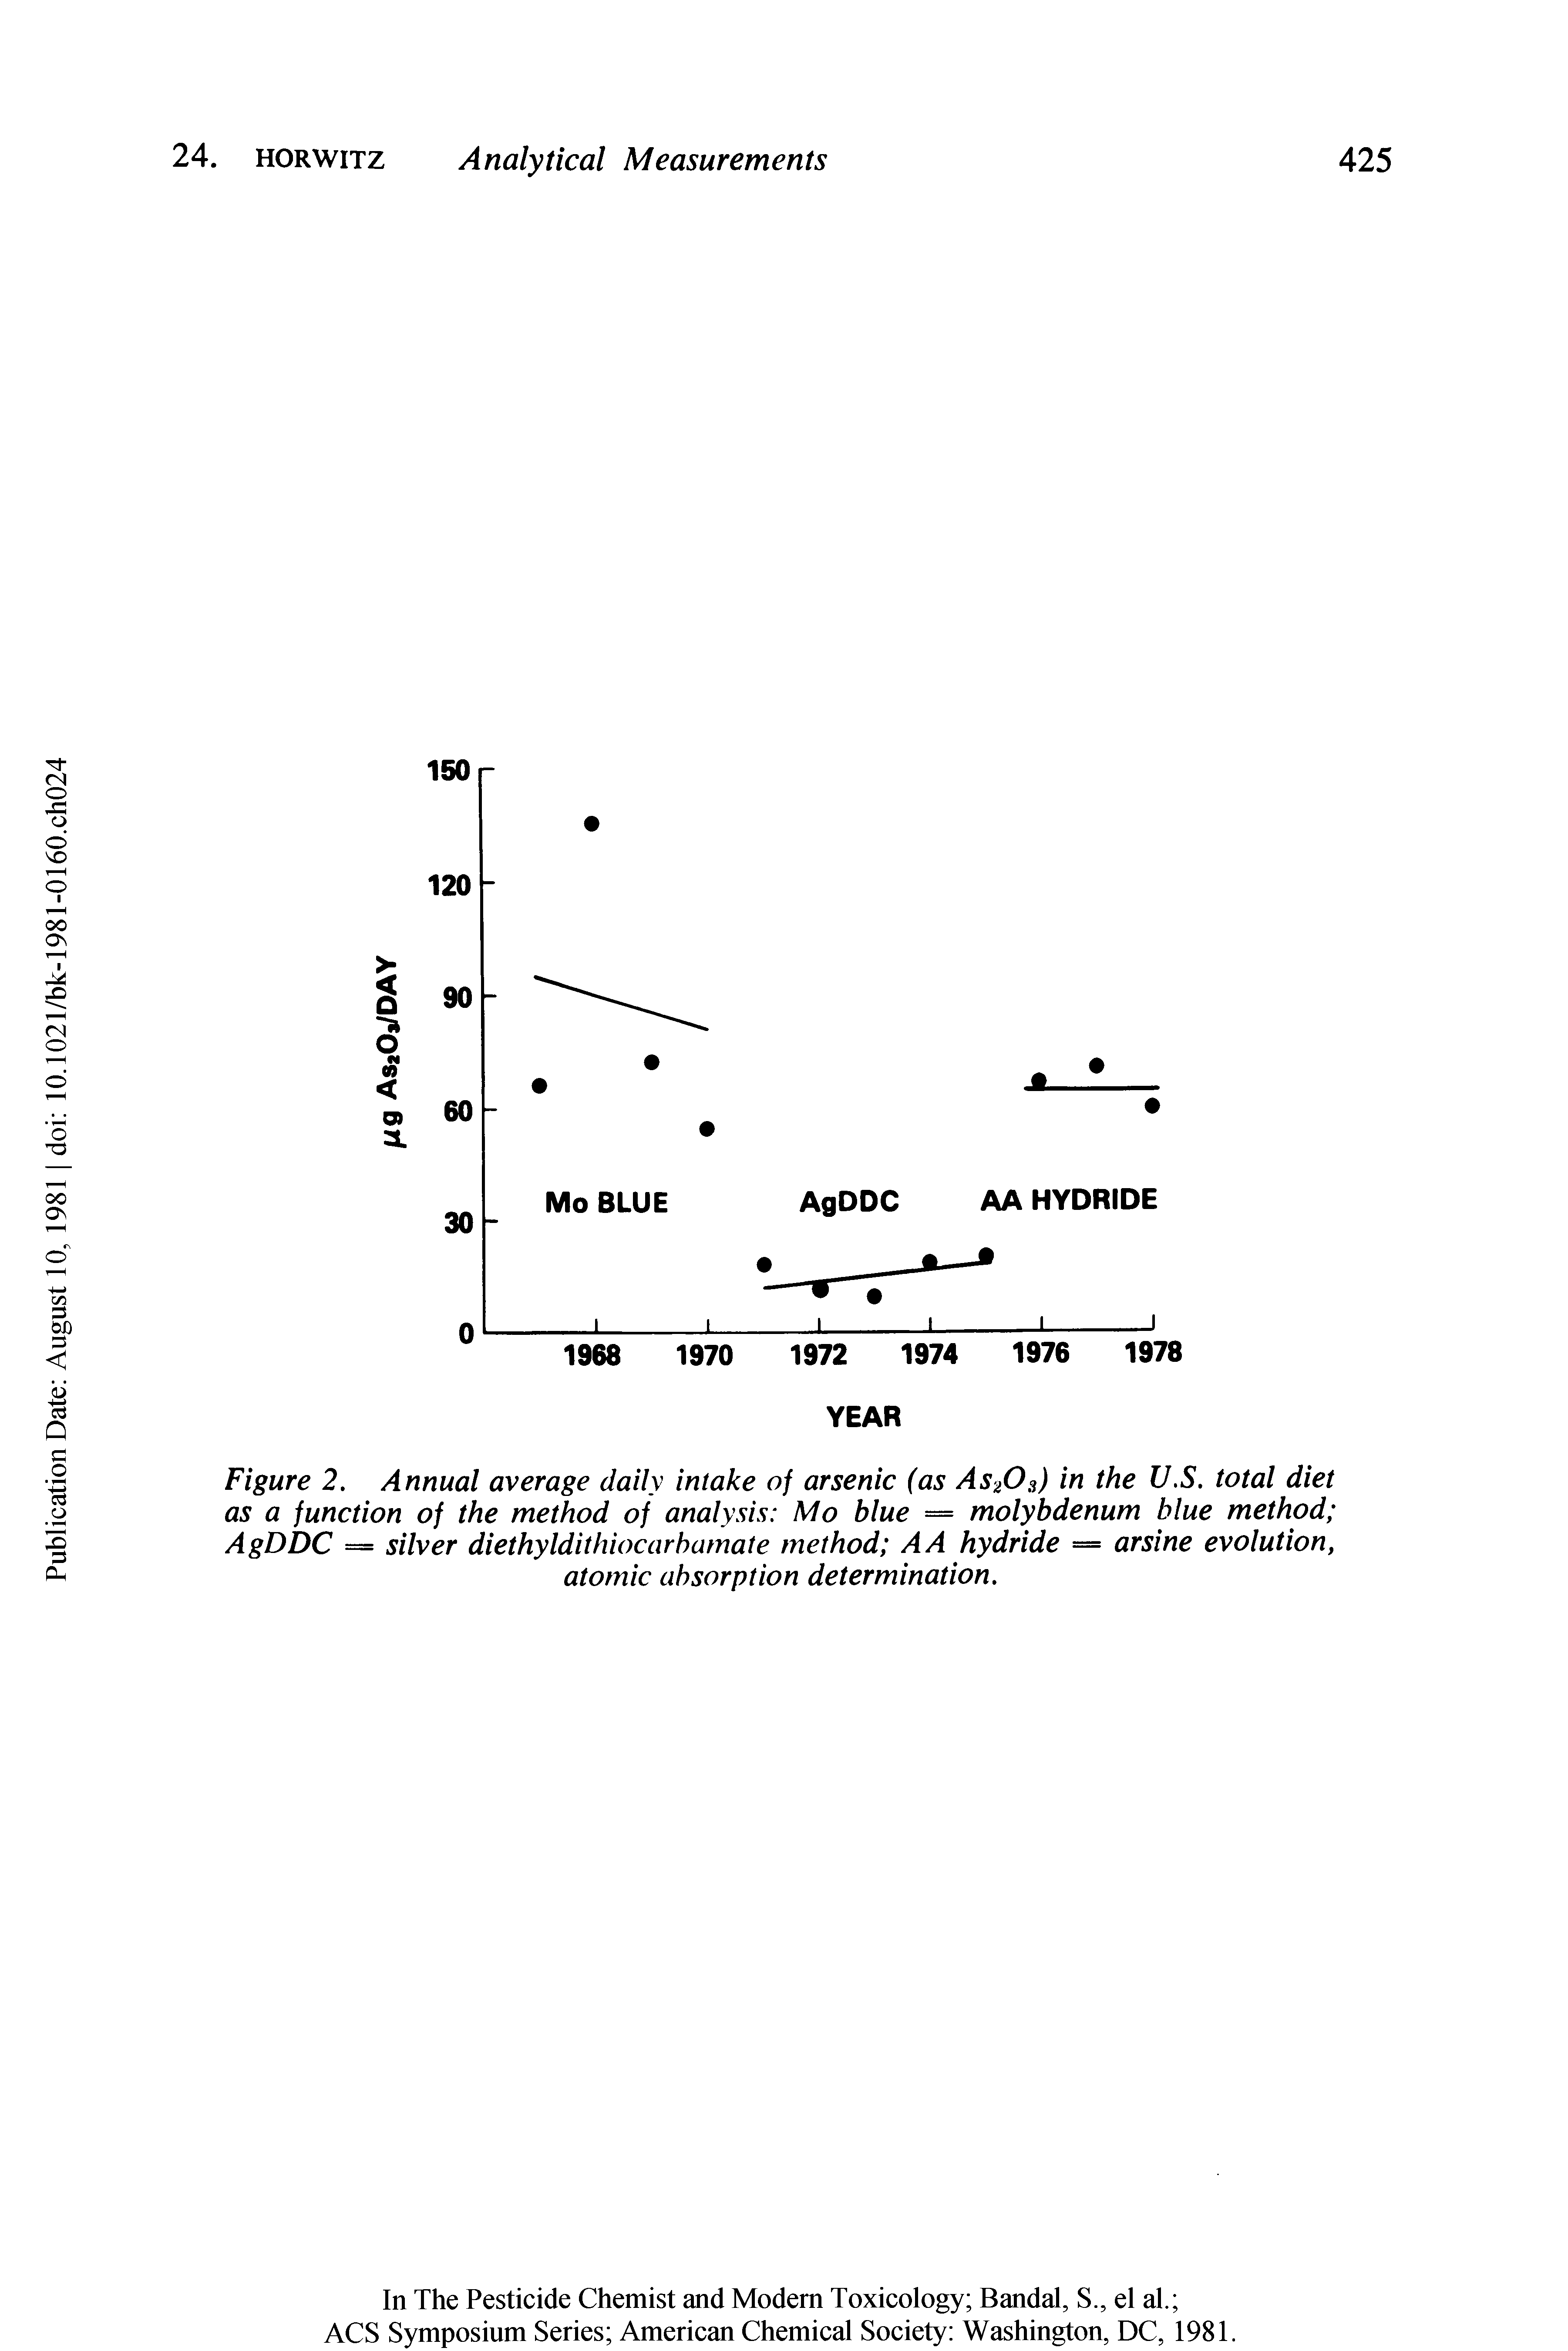 Figure 2. Annual average daily intake of arsenic (as As Os) in the US. total diet as a function of the method of analysis Mo blue = molybdenum blue method AgDDC = silver diethyldithiocarbamate method A A hydride = arsine evolution, atomic absorption determination.